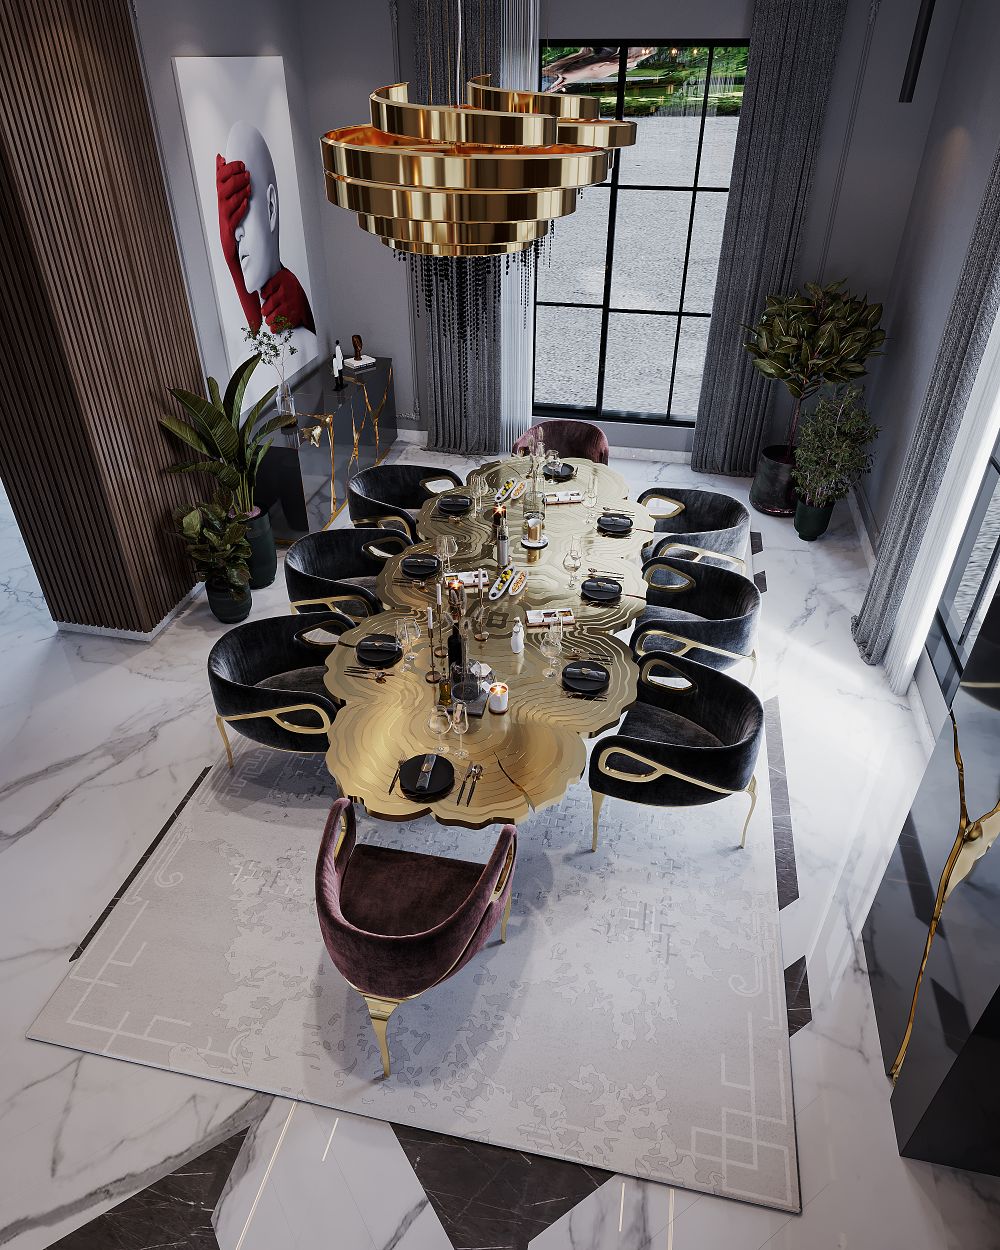 Ruin rug decorates this dining room floor with delicacy with the velvet dining chairs and gold dining table